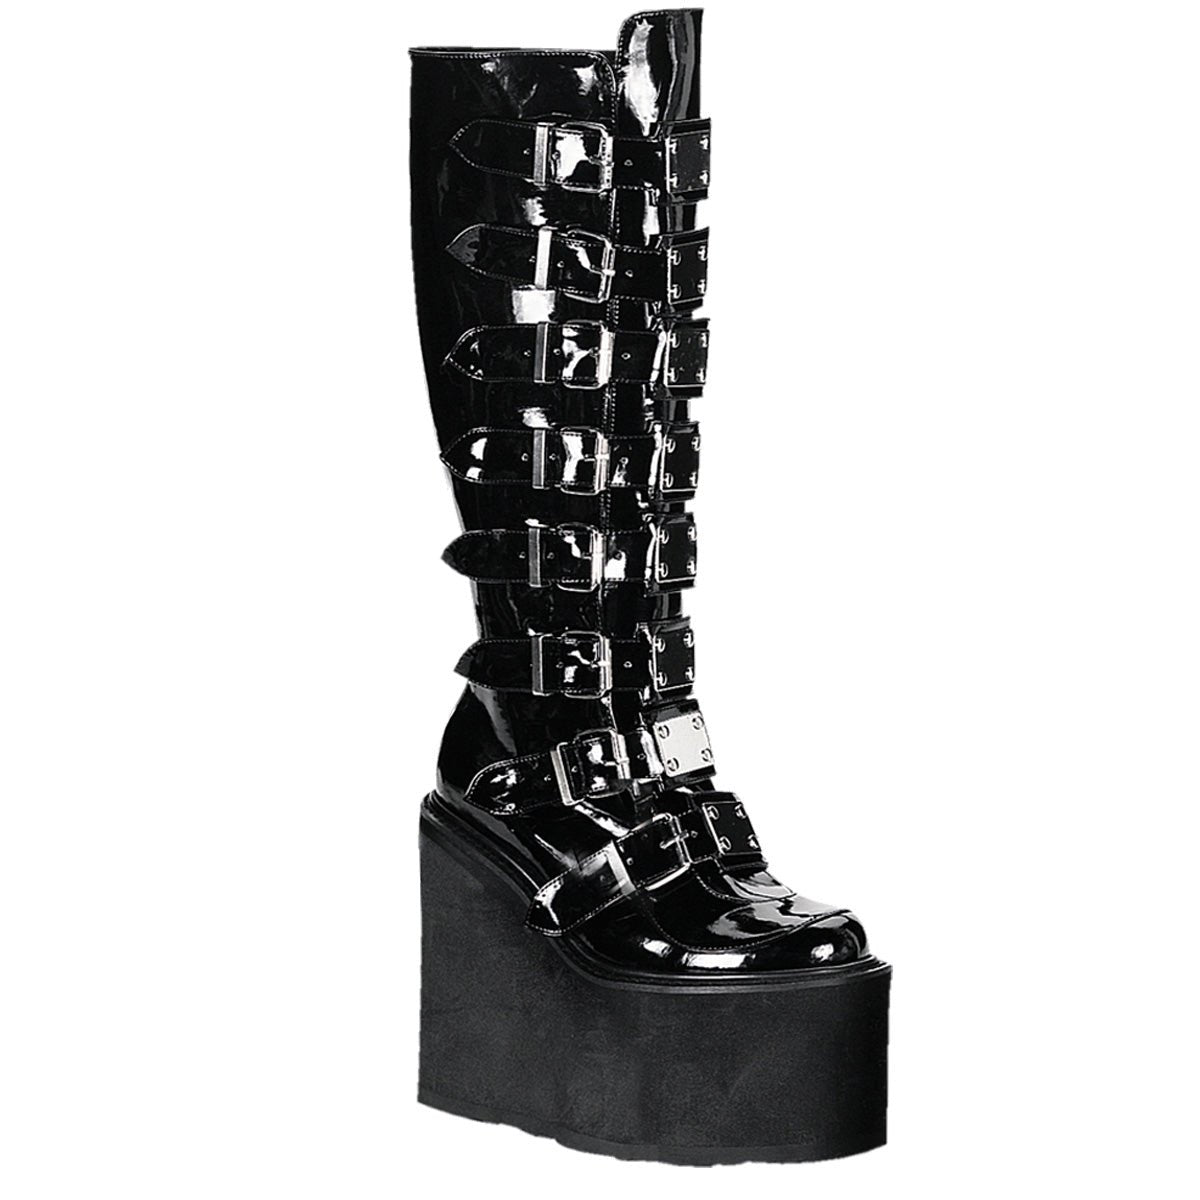 Too Fast | Demonia Swing 815 | Black Patent Leather Women&#39;s Knee High Boots